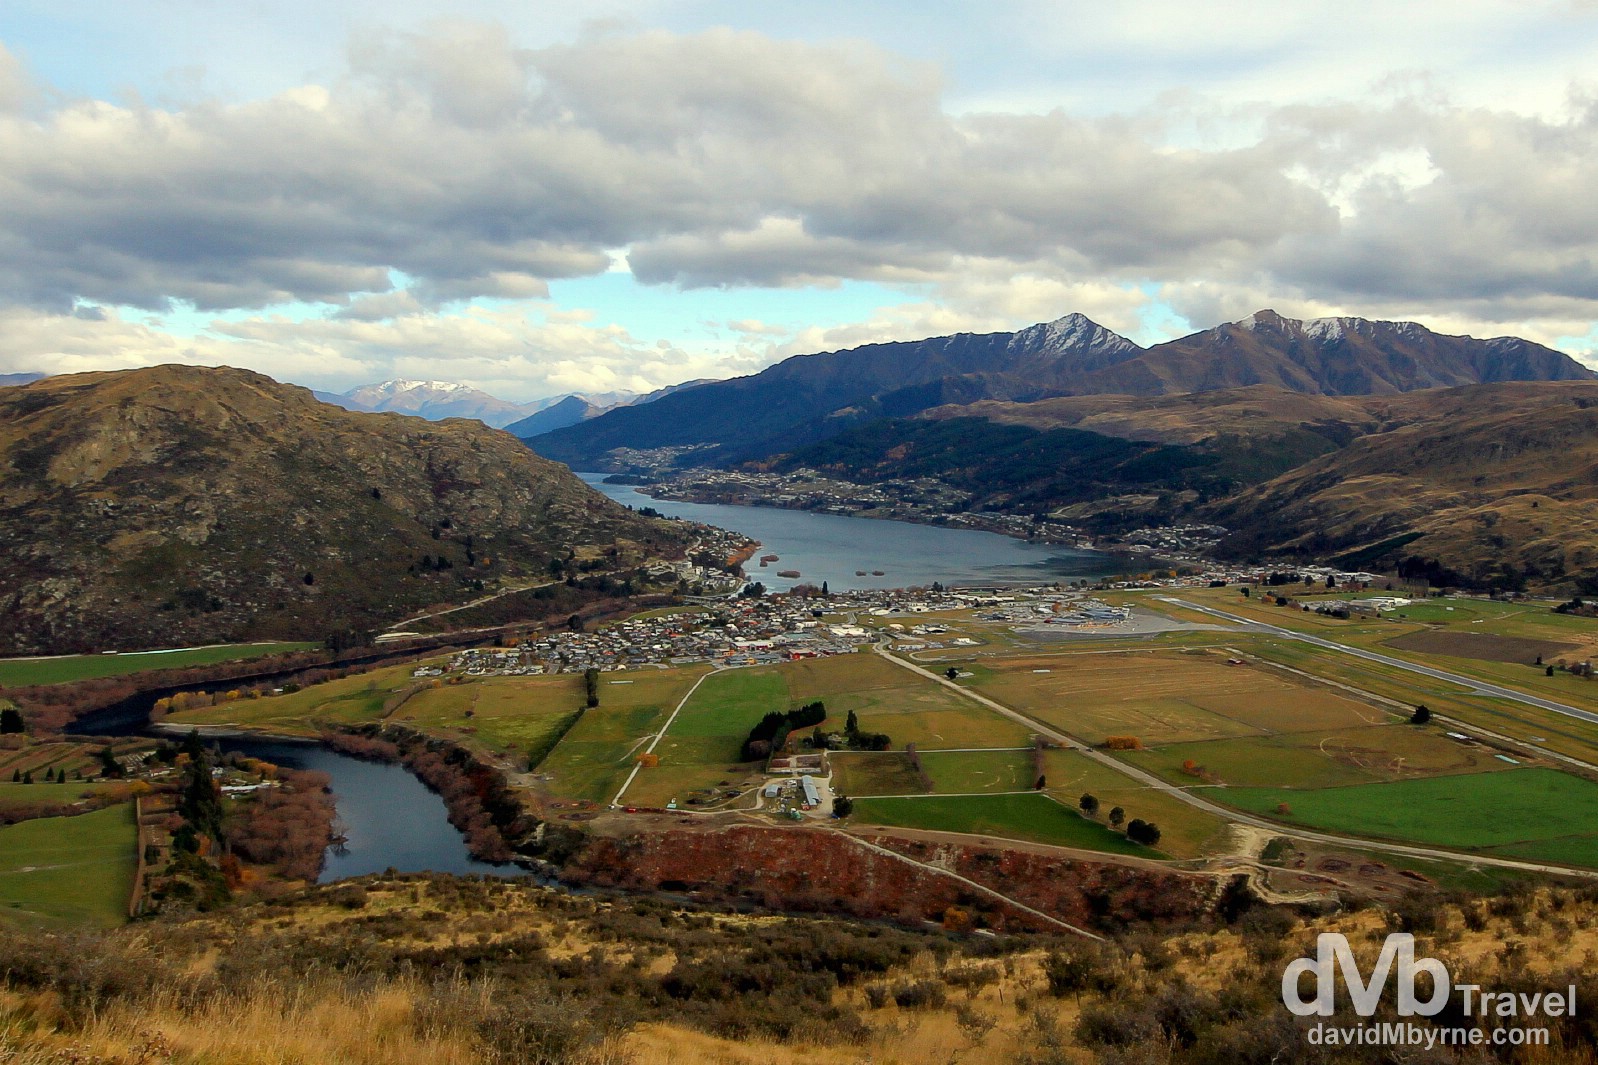 Frankton & Queenstown as seen from the road to The Remarkables ski field, South Island, New Zealand. May 24th 2012.